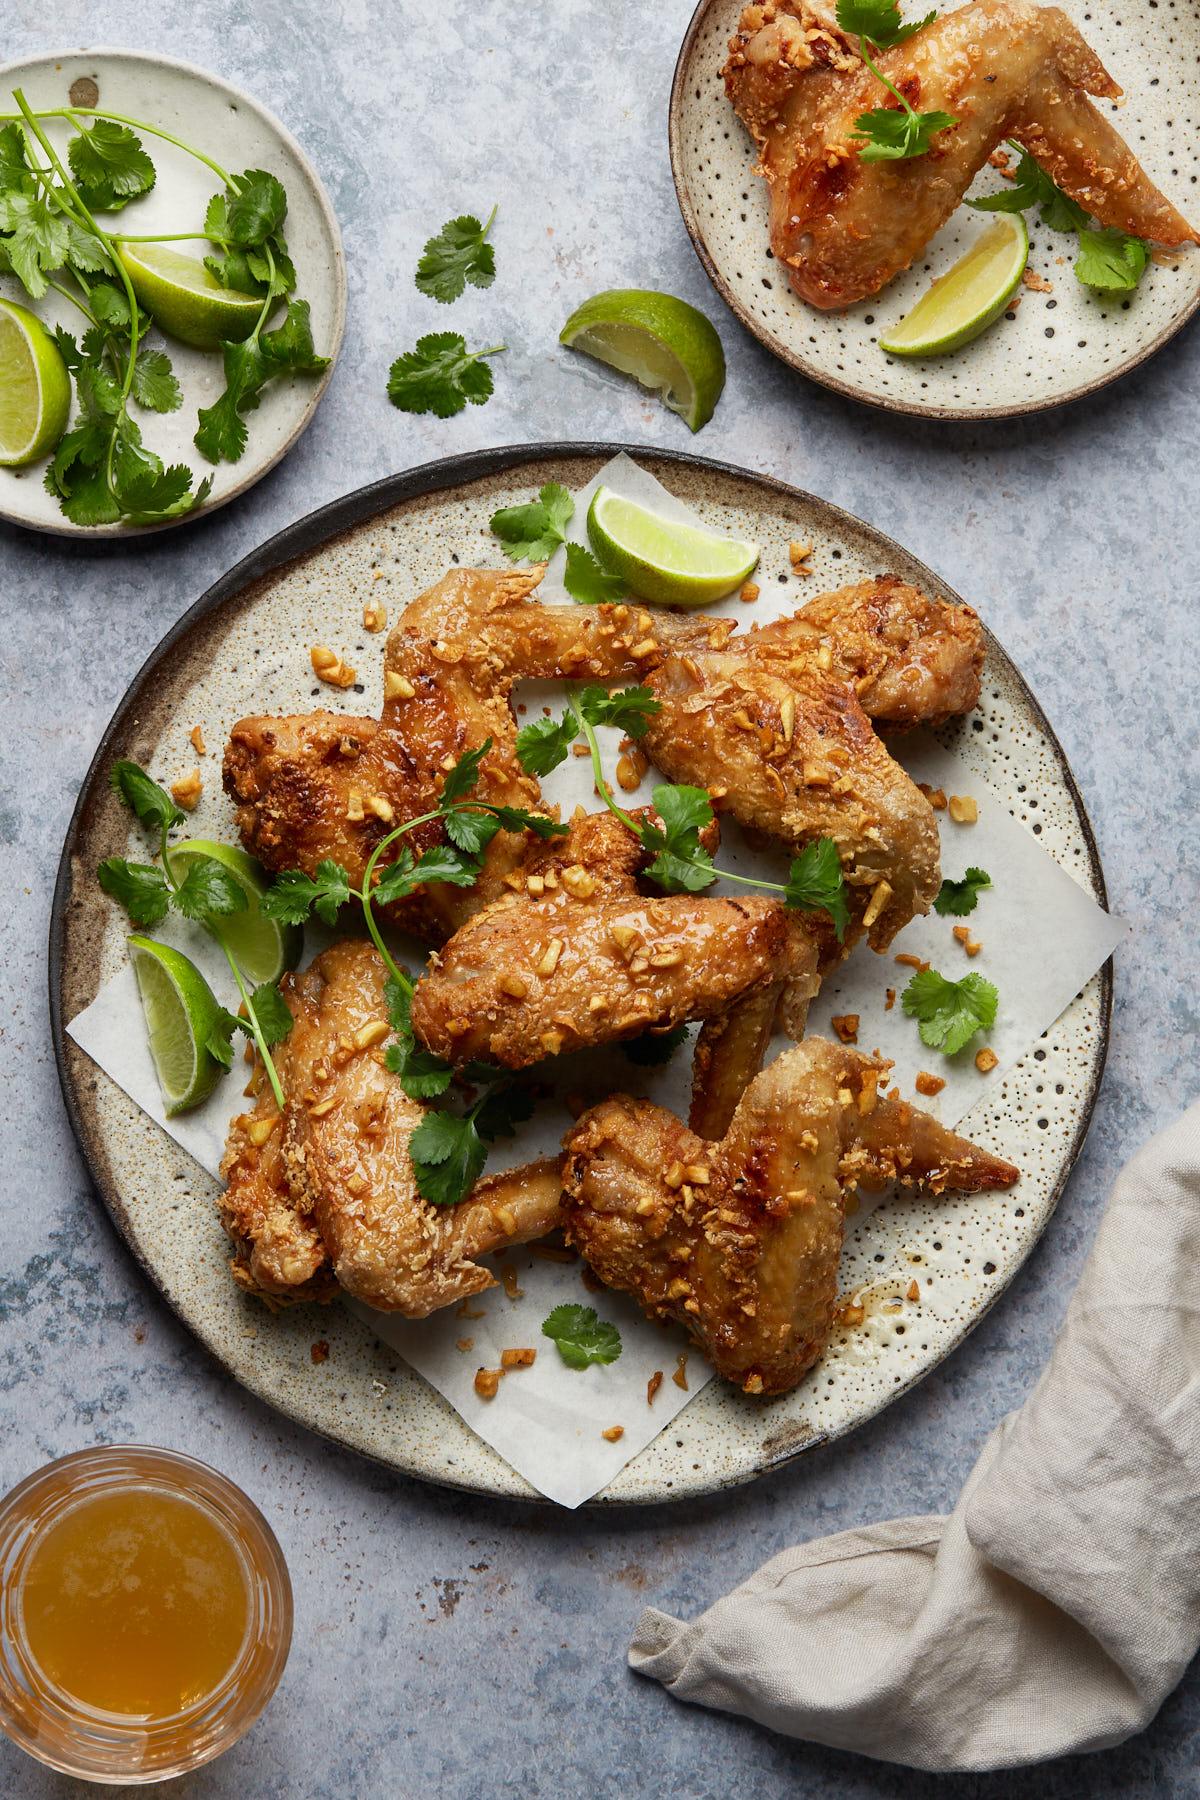 a platter of chicken wings next to a glass of beer, kitchen linen, plate with cilantro and lime wedges, and a plate with one wing